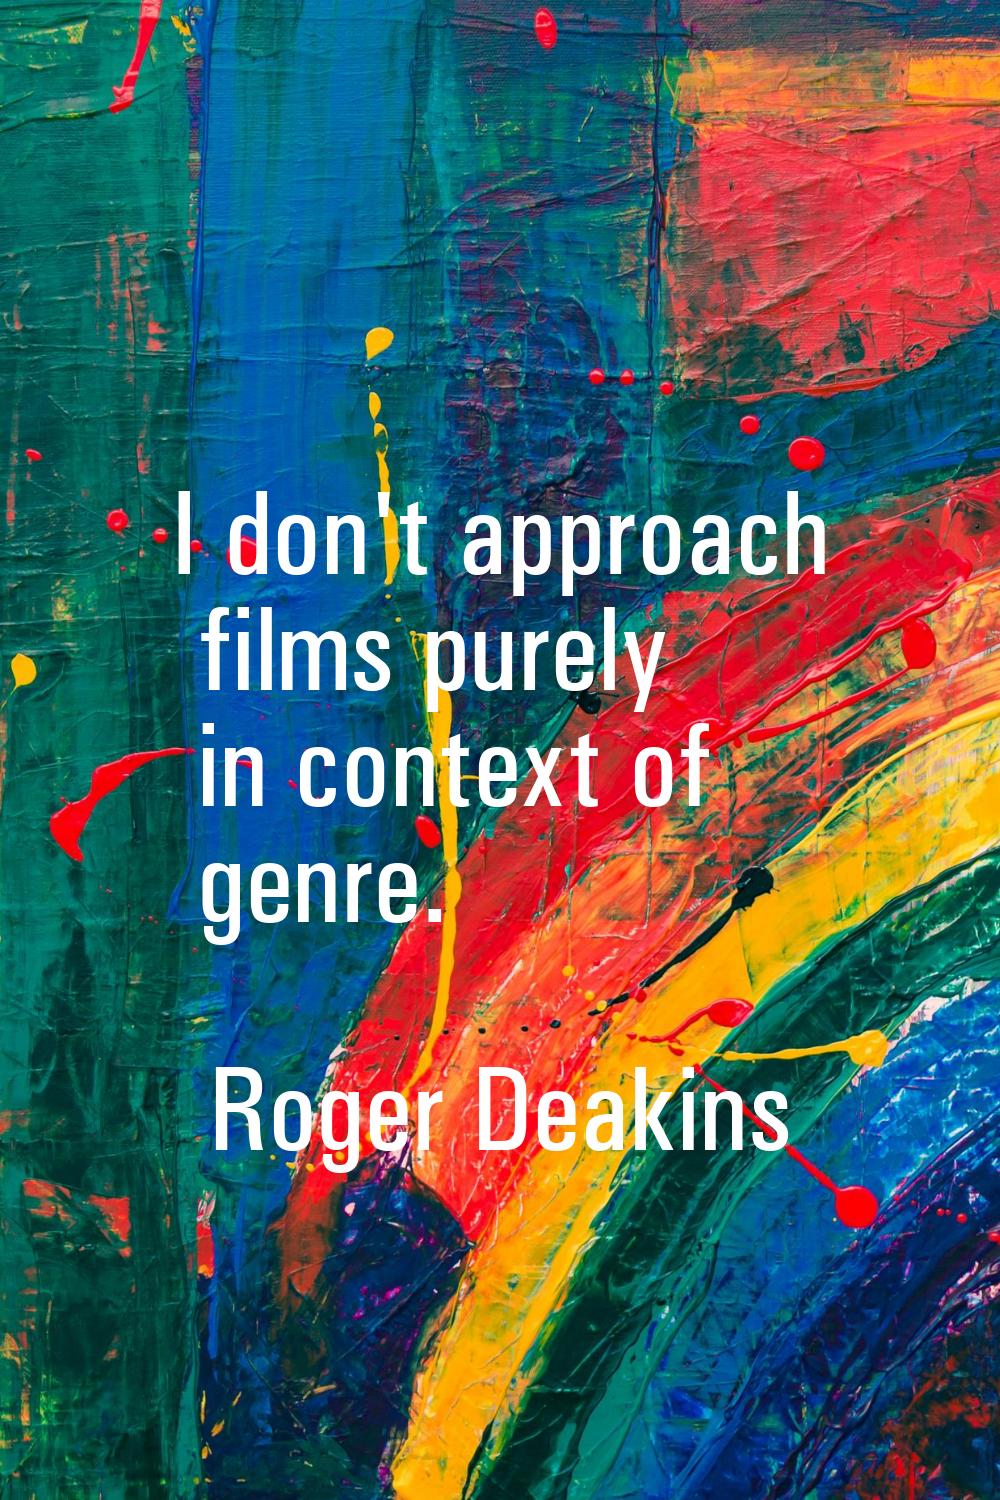 I don't approach films purely in context of genre.